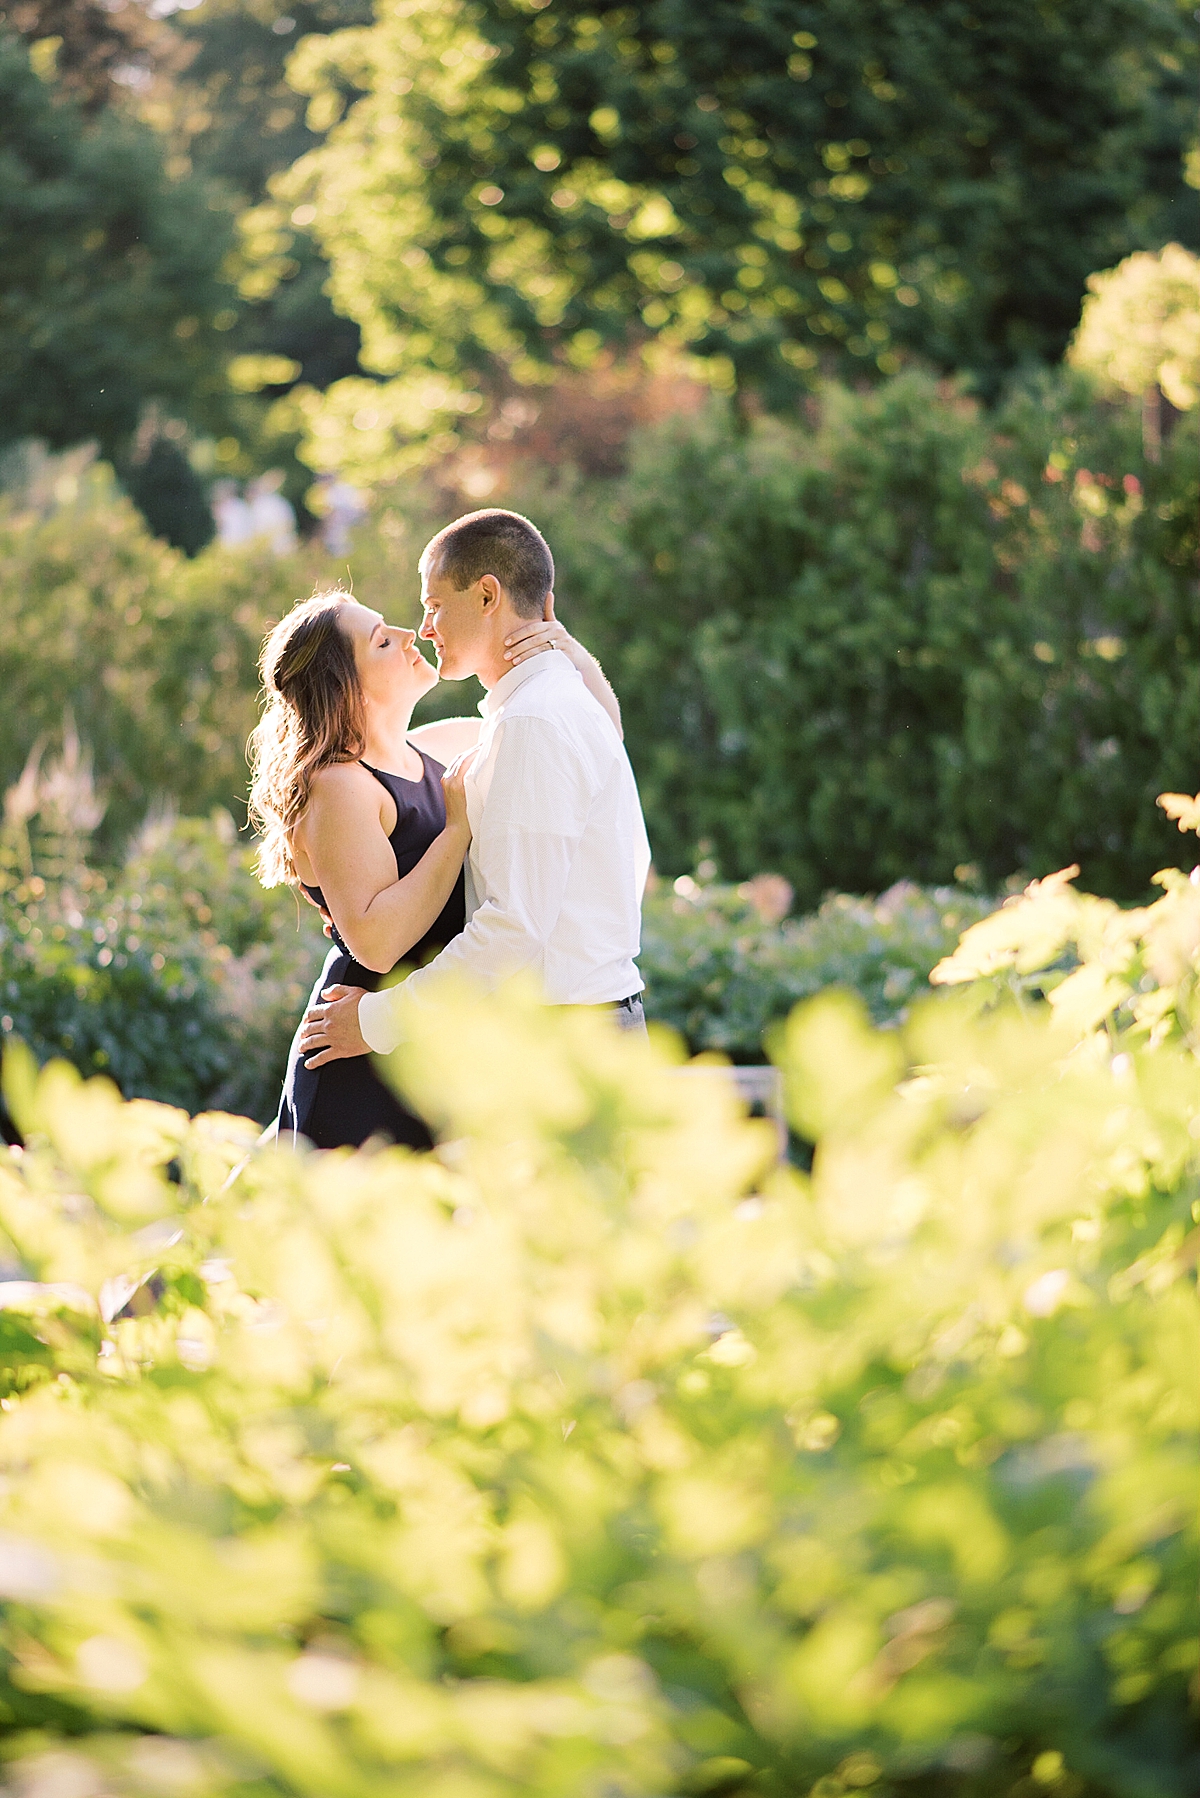 Gorgeous summer sunset engagement session at the romantic Longwood Gardens in Kennett Square outside of Philadelphia, Pennsylvania by engagement photographers Michelle Behre Photography.